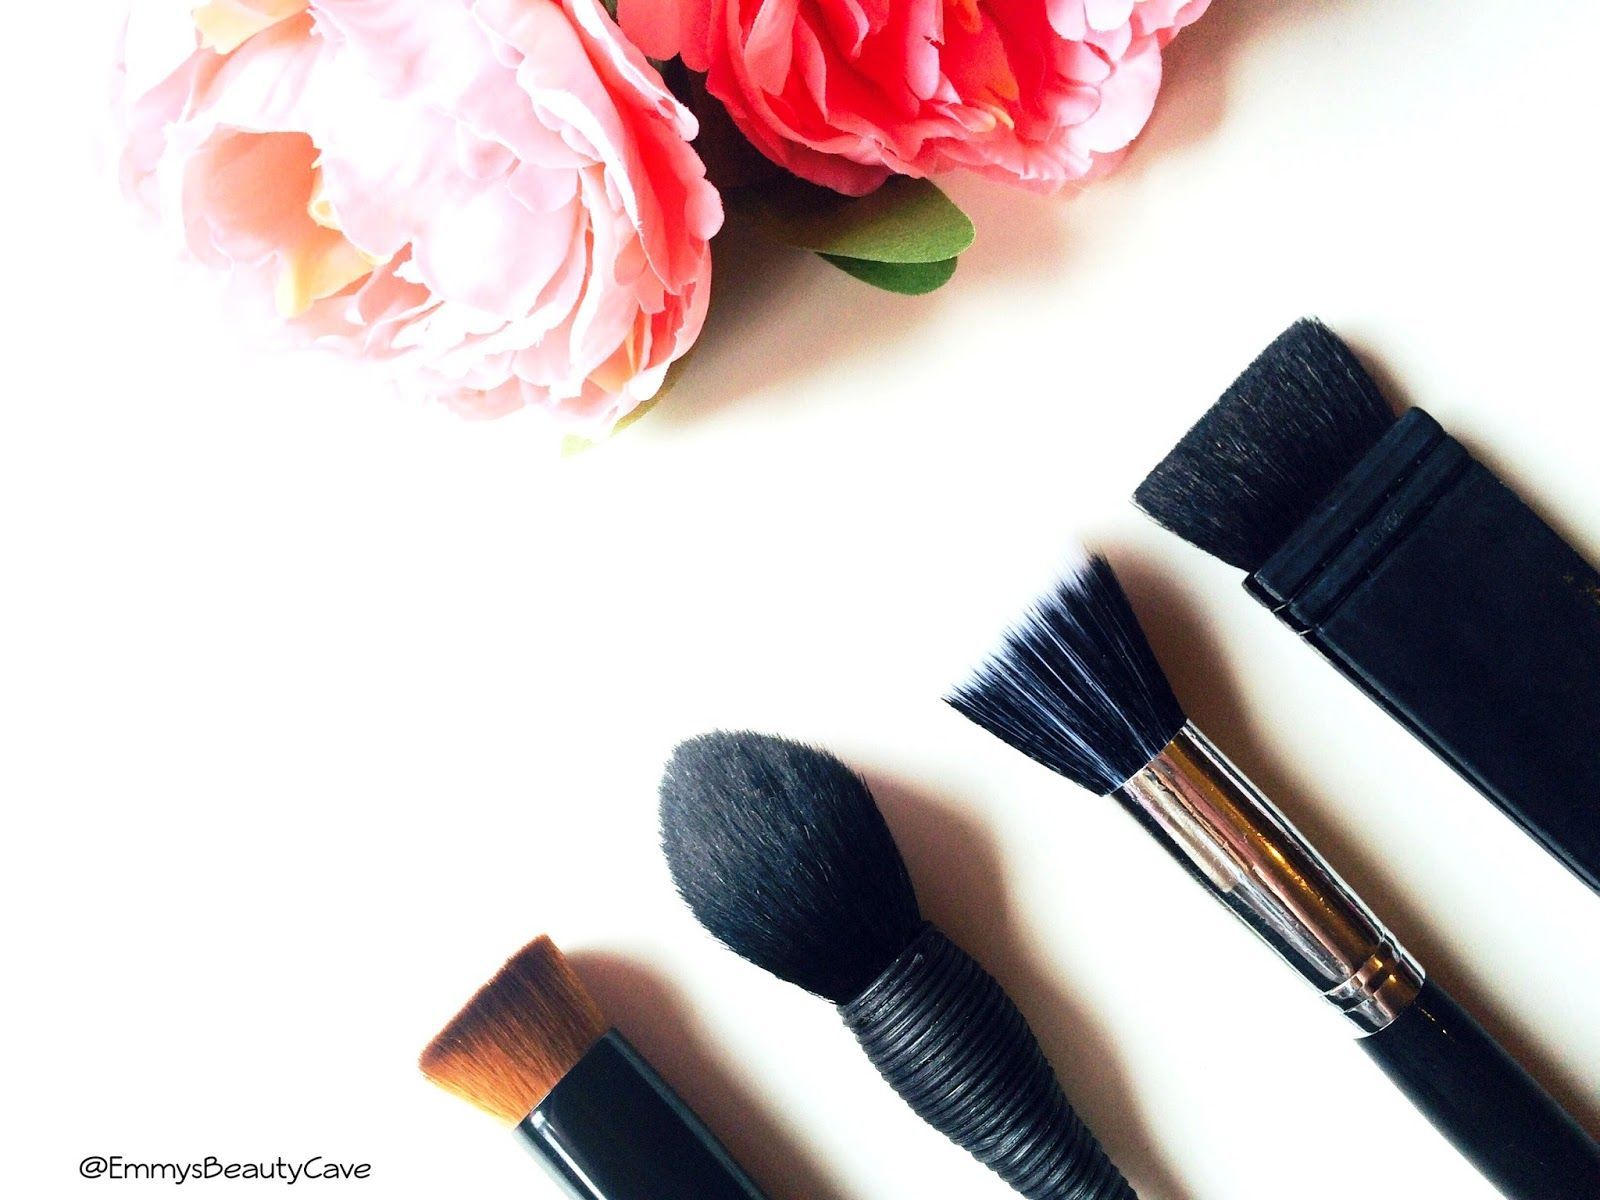 Bargain Budget Makeup Brushes Worth A Buy EmmysBeautyCave